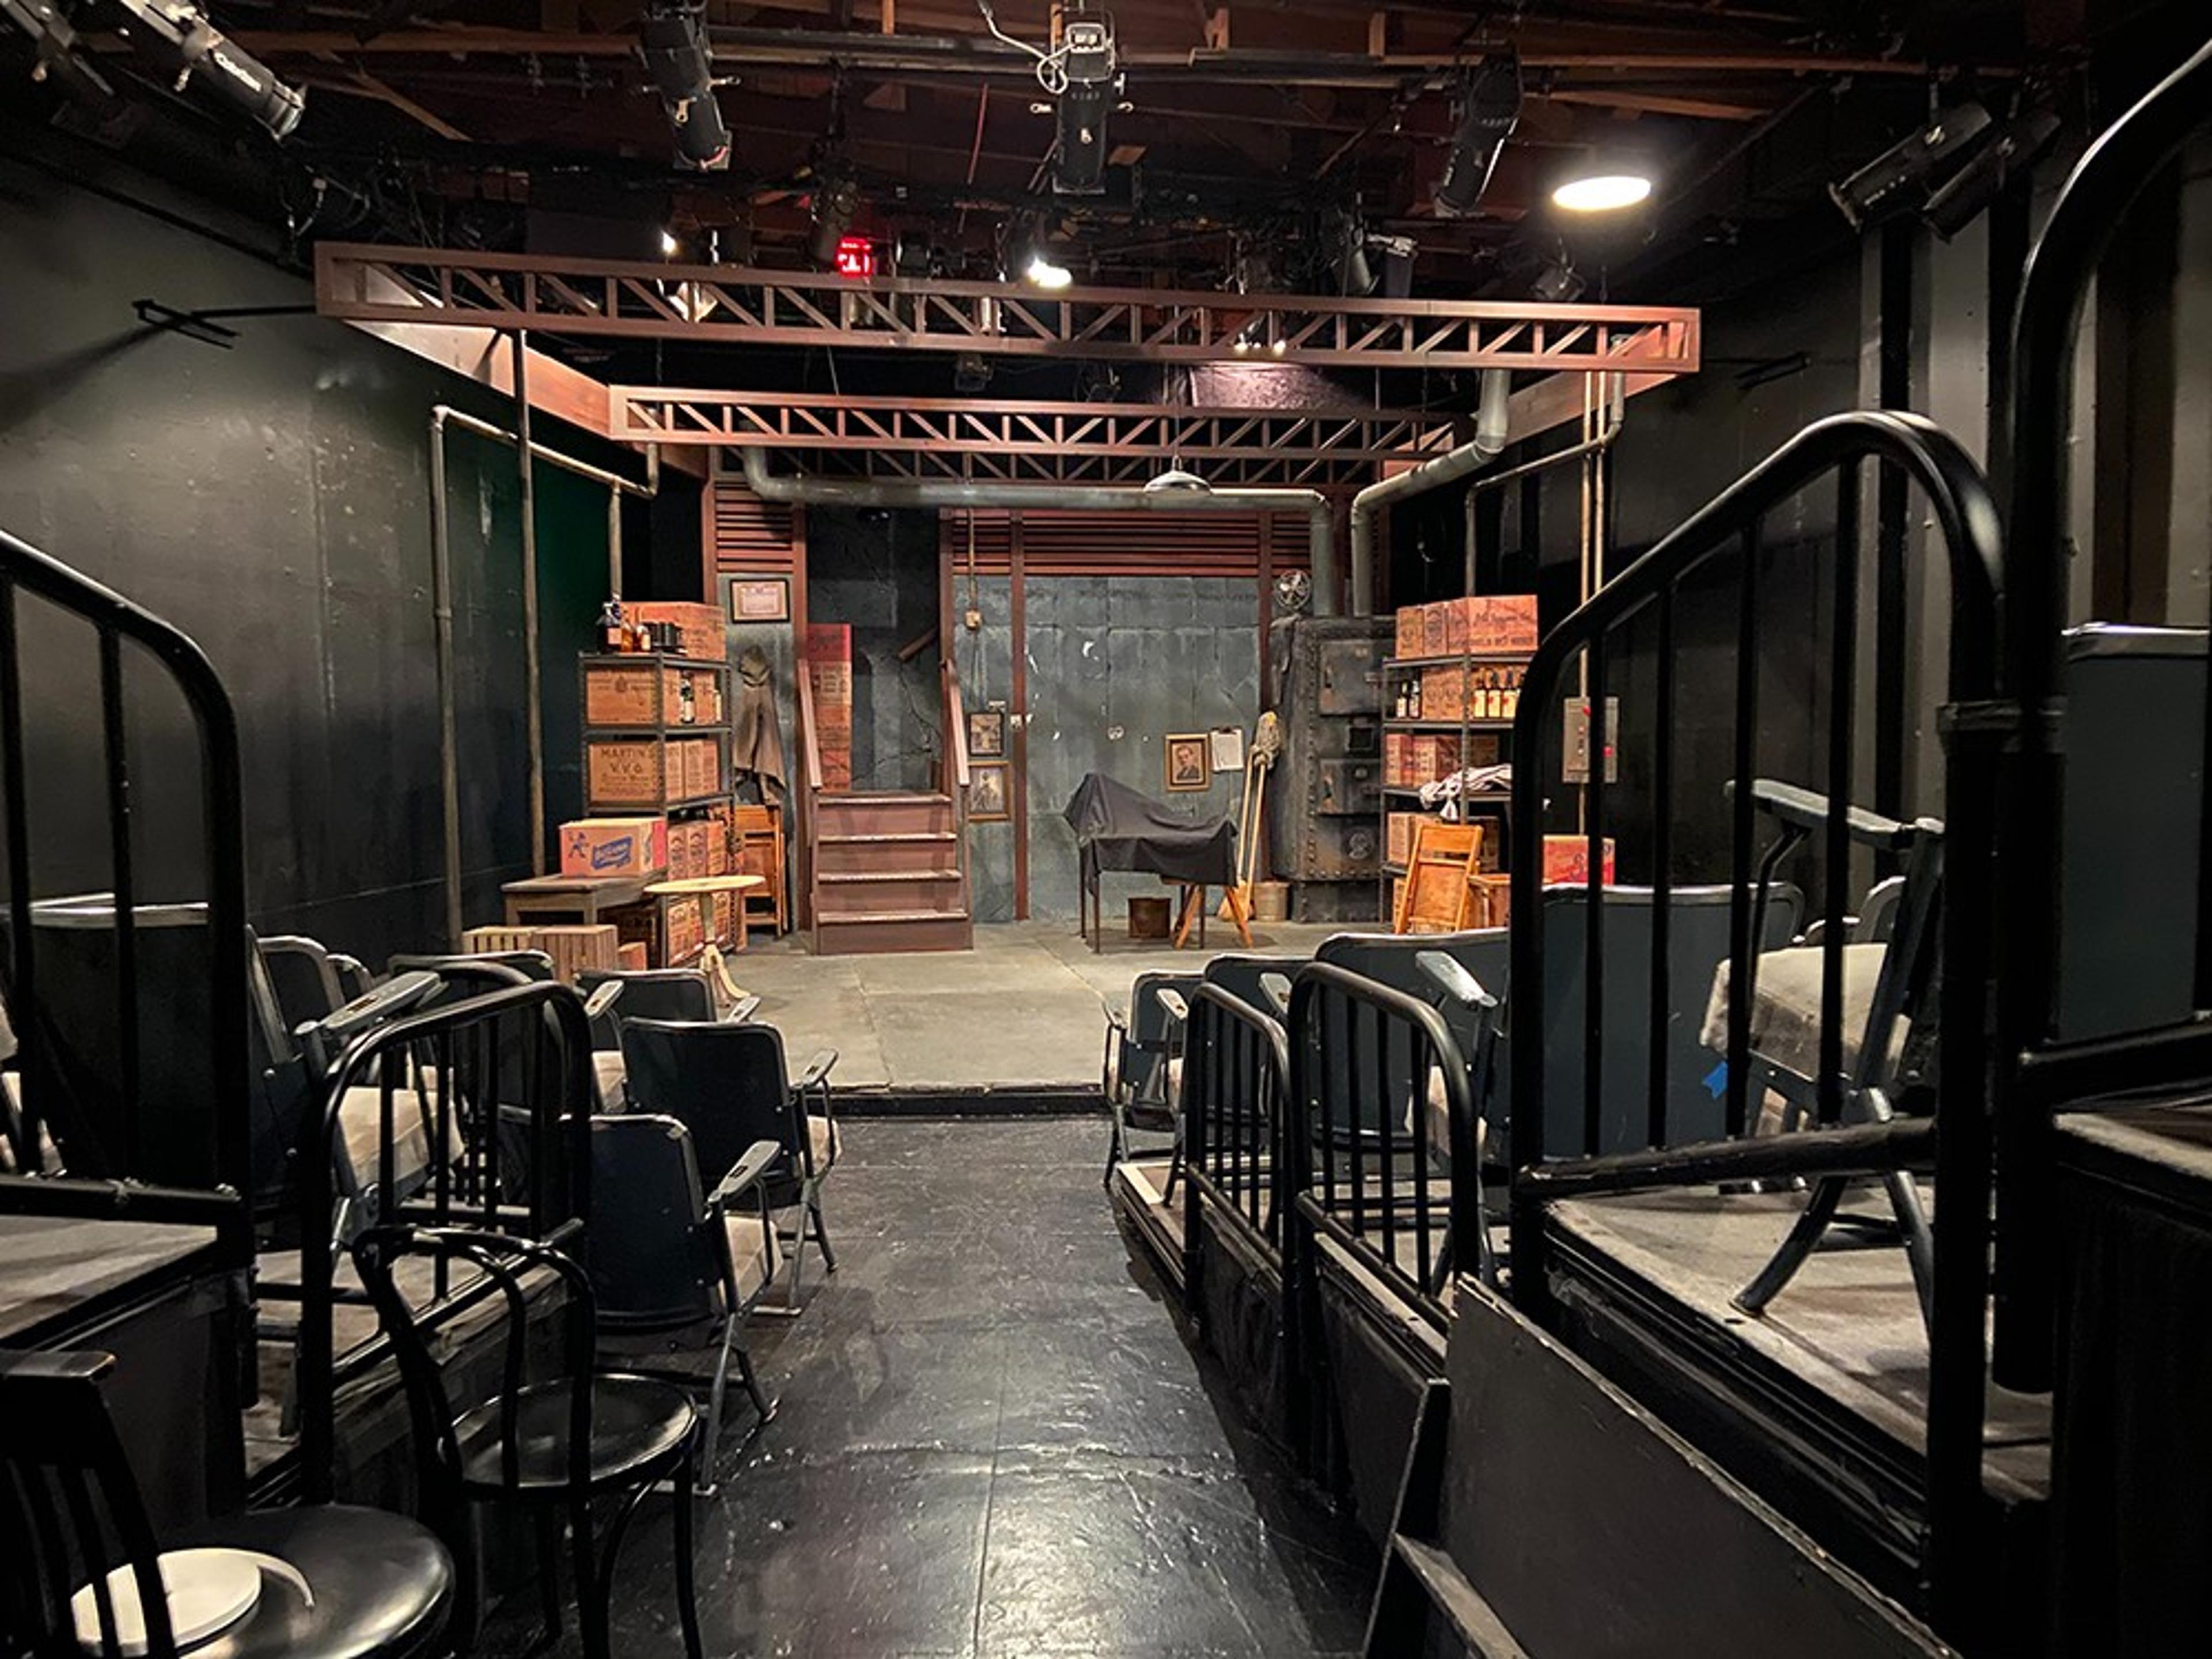 Pacific Resident Theatre